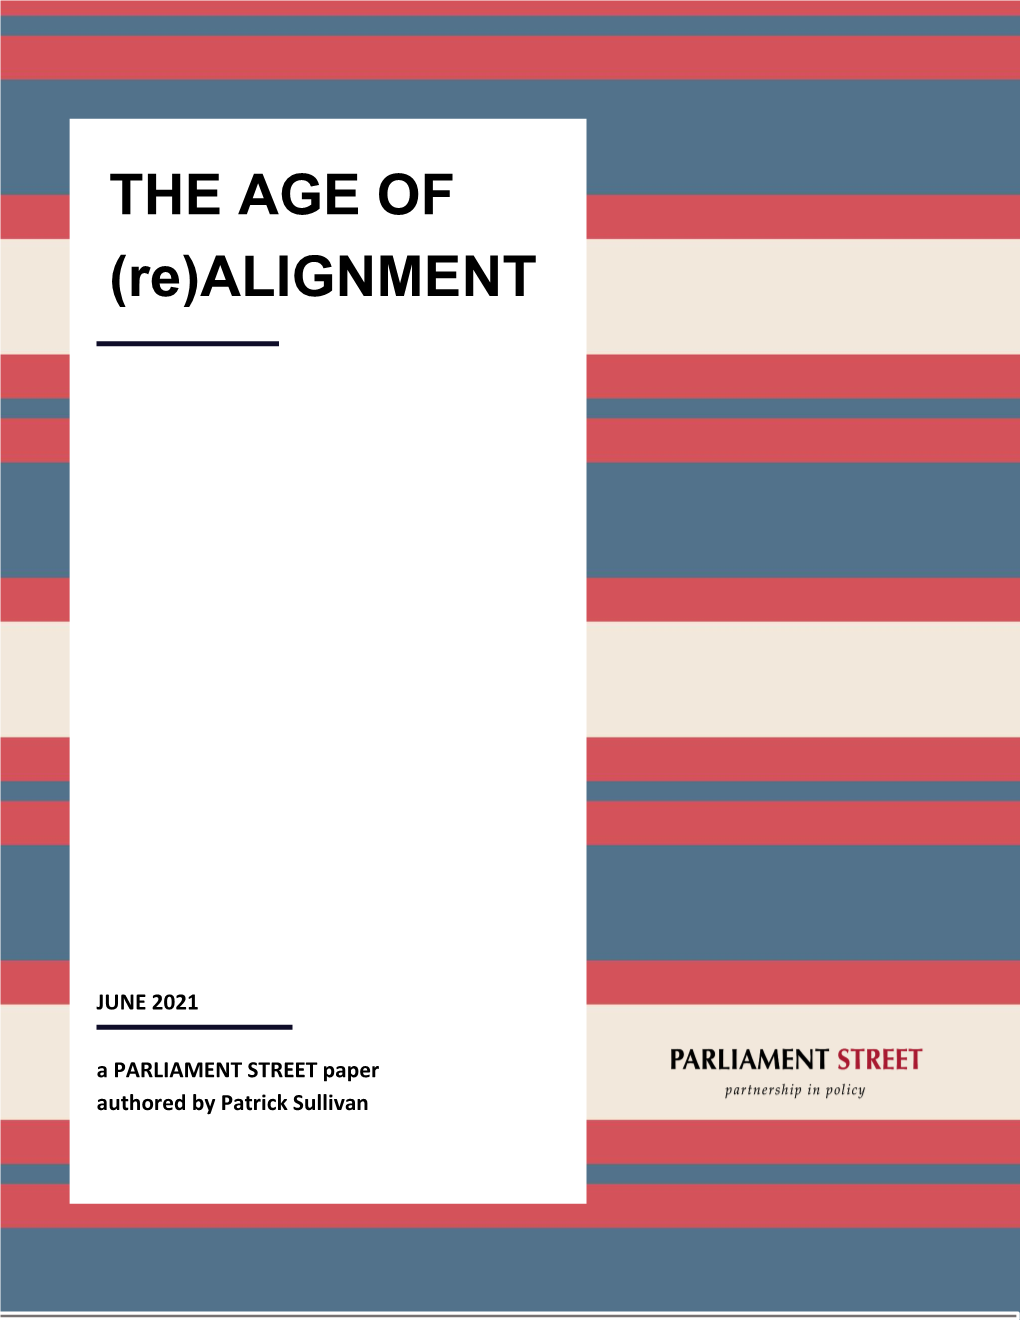 THE AGE of (Re)ALIGNMENT